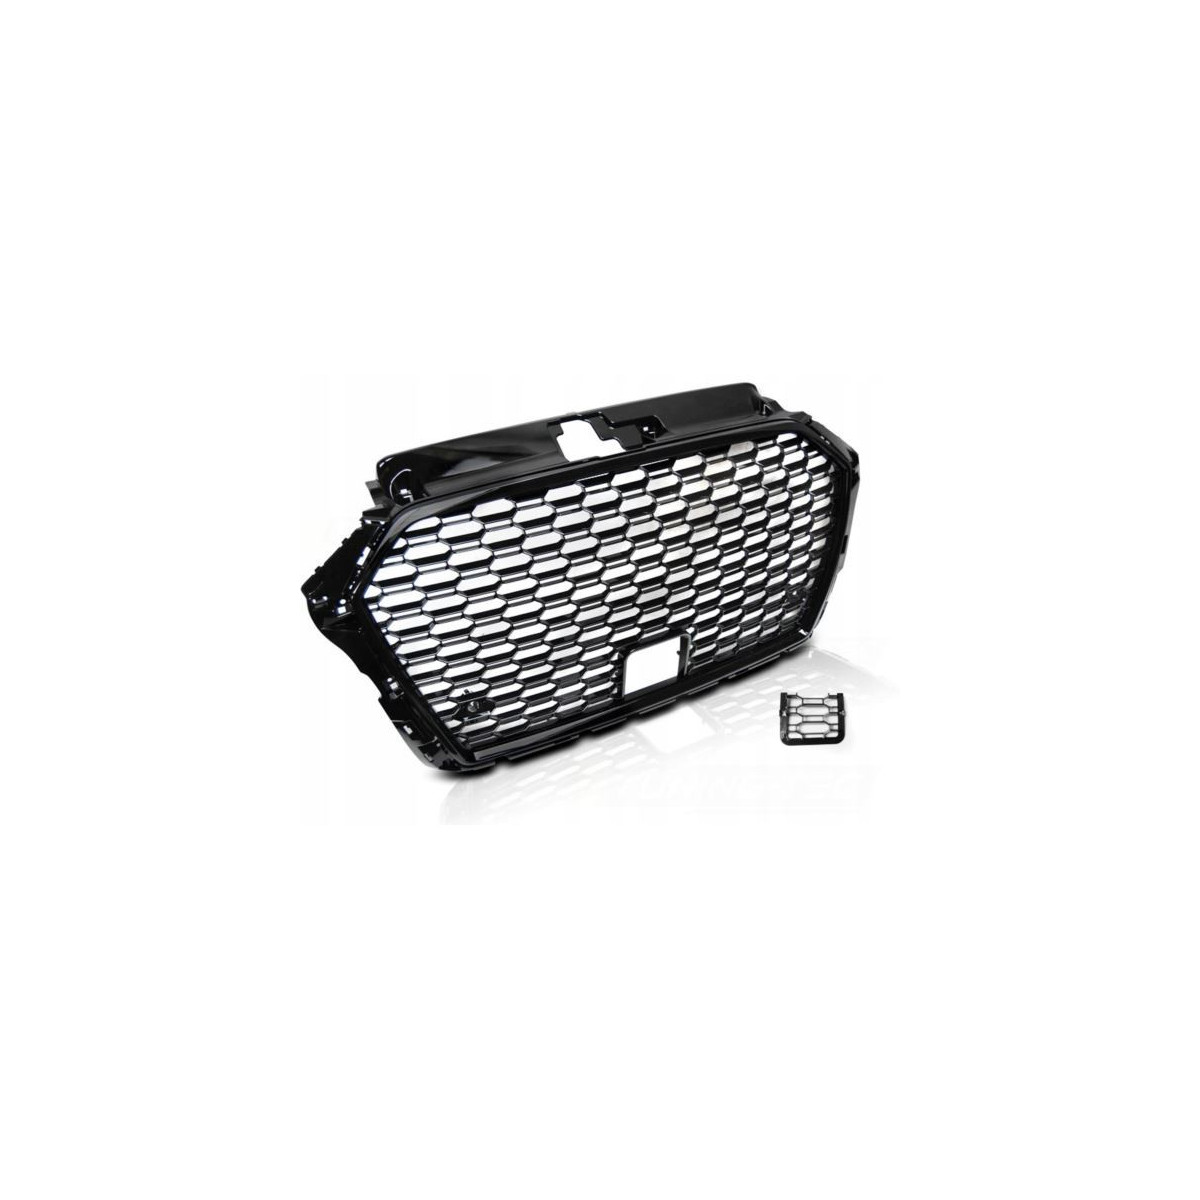 GRILL AUDI A3 8V 17- RS3 STYLE GLOSSY BLACK